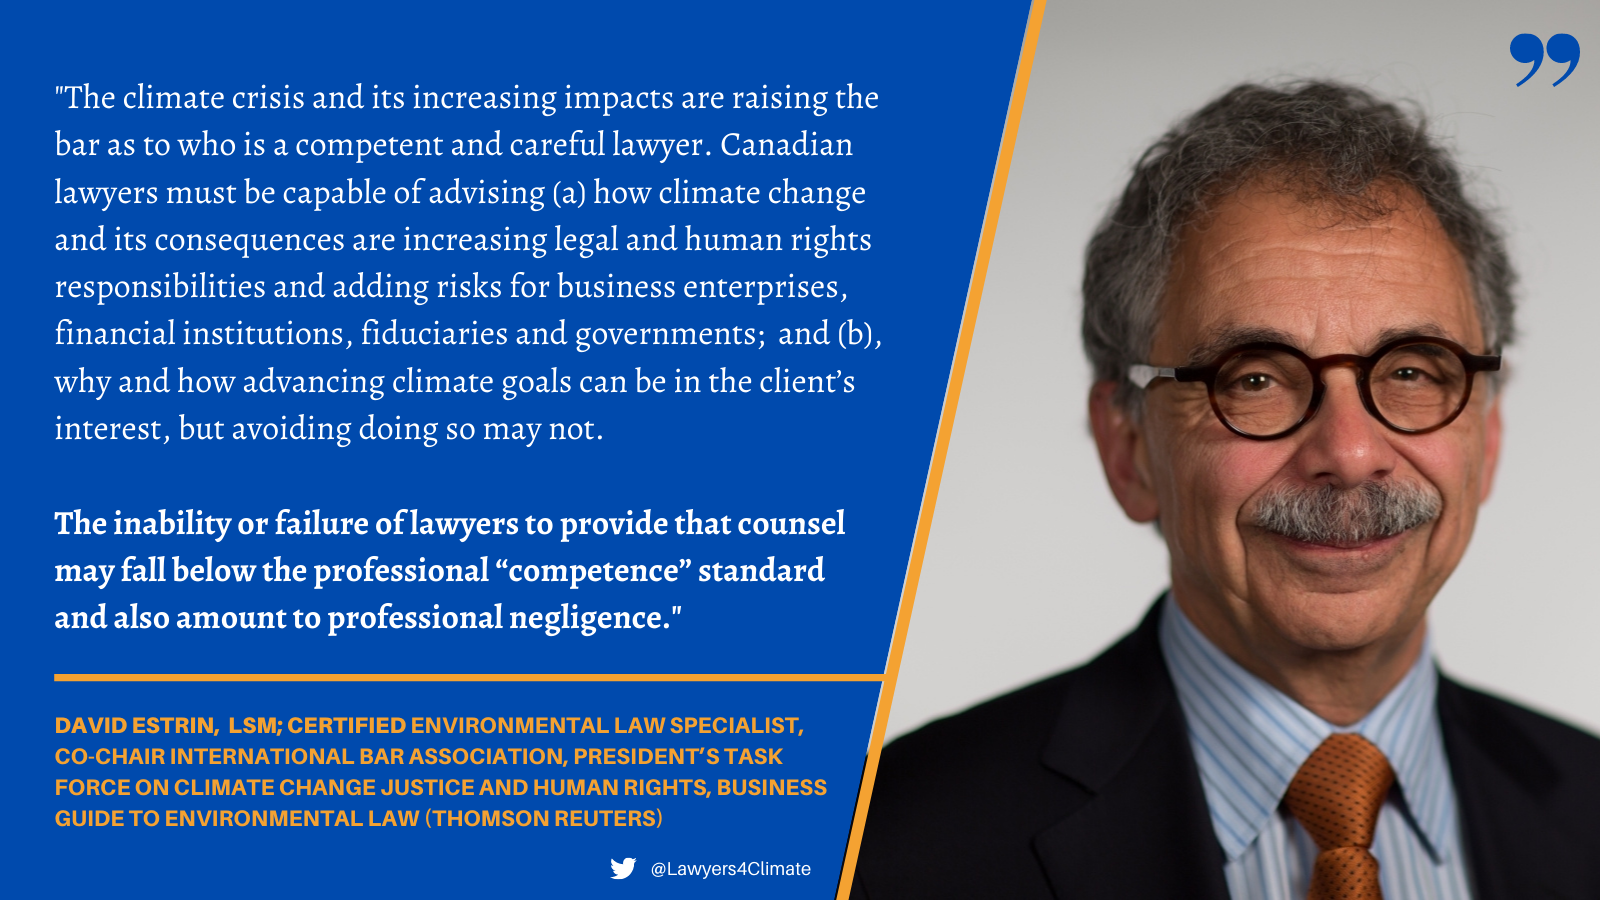  David Estrin comments on lawyers’ professional obligations for Climate Change Leadership 